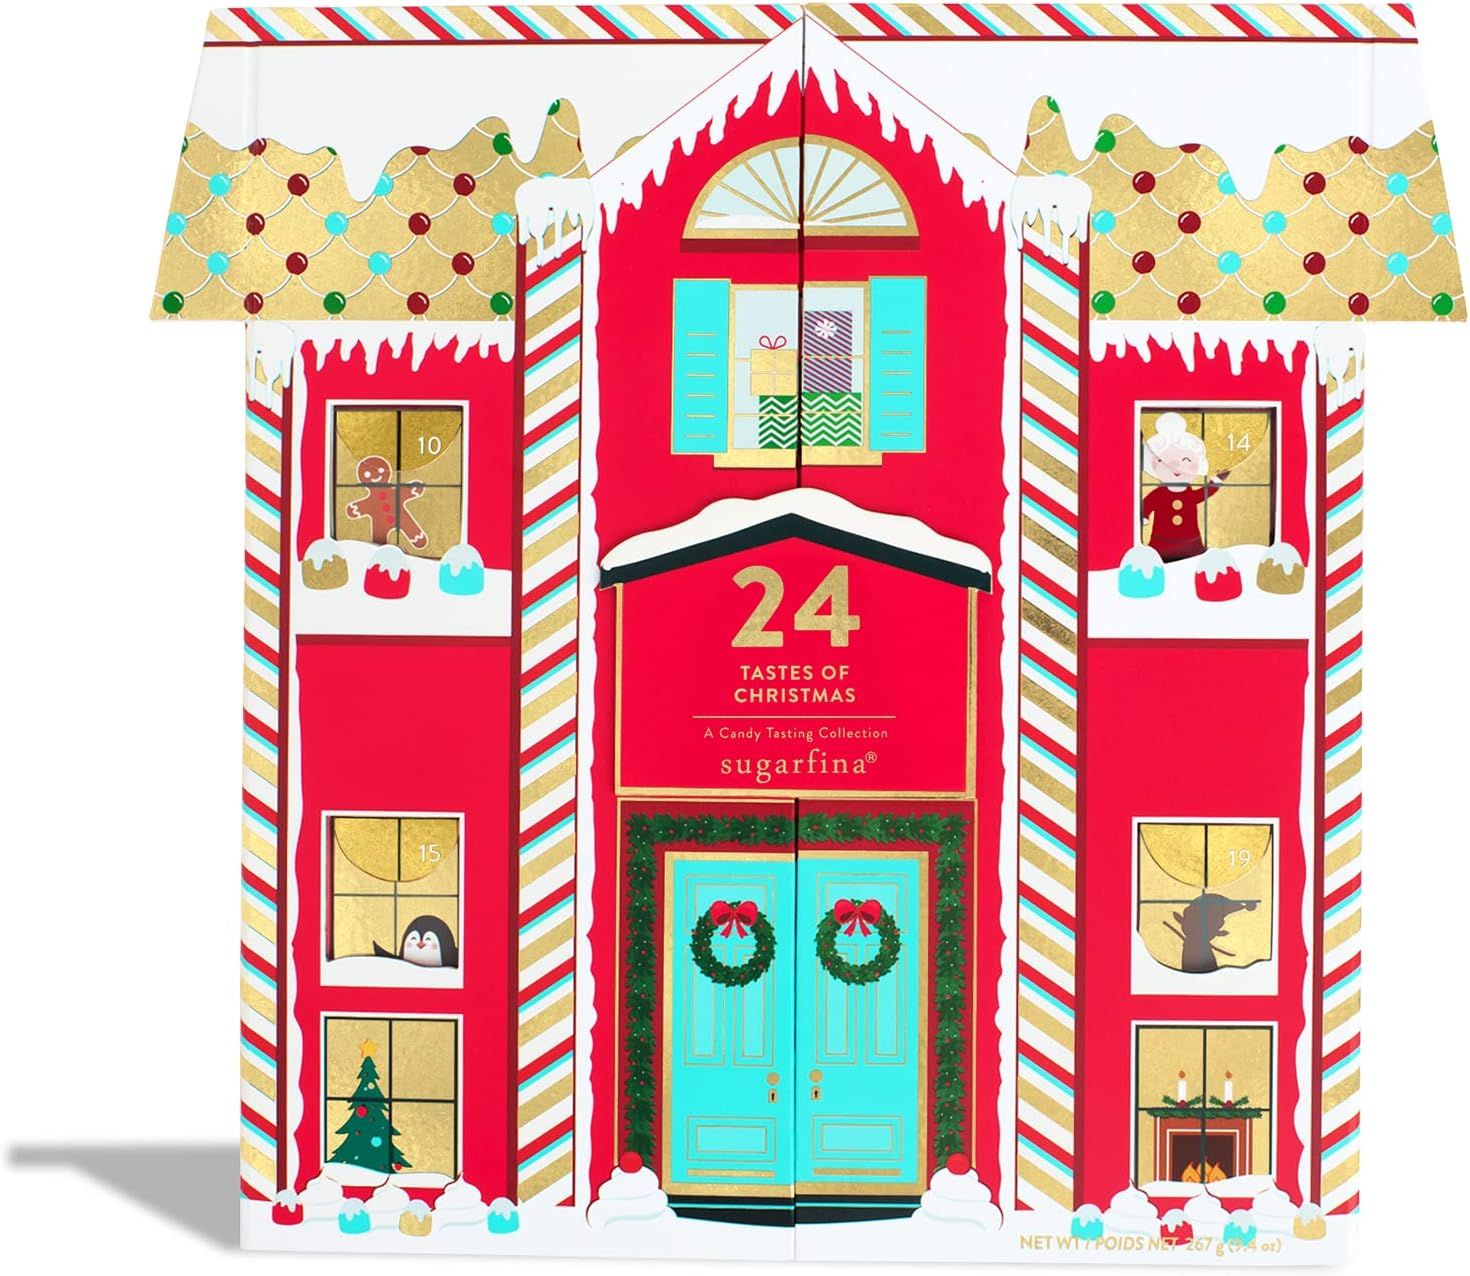 Sugarfina Gingerbread 24 Tastes of Christmas Candy Tasting Collection Advent Calendar | Amazon (US)